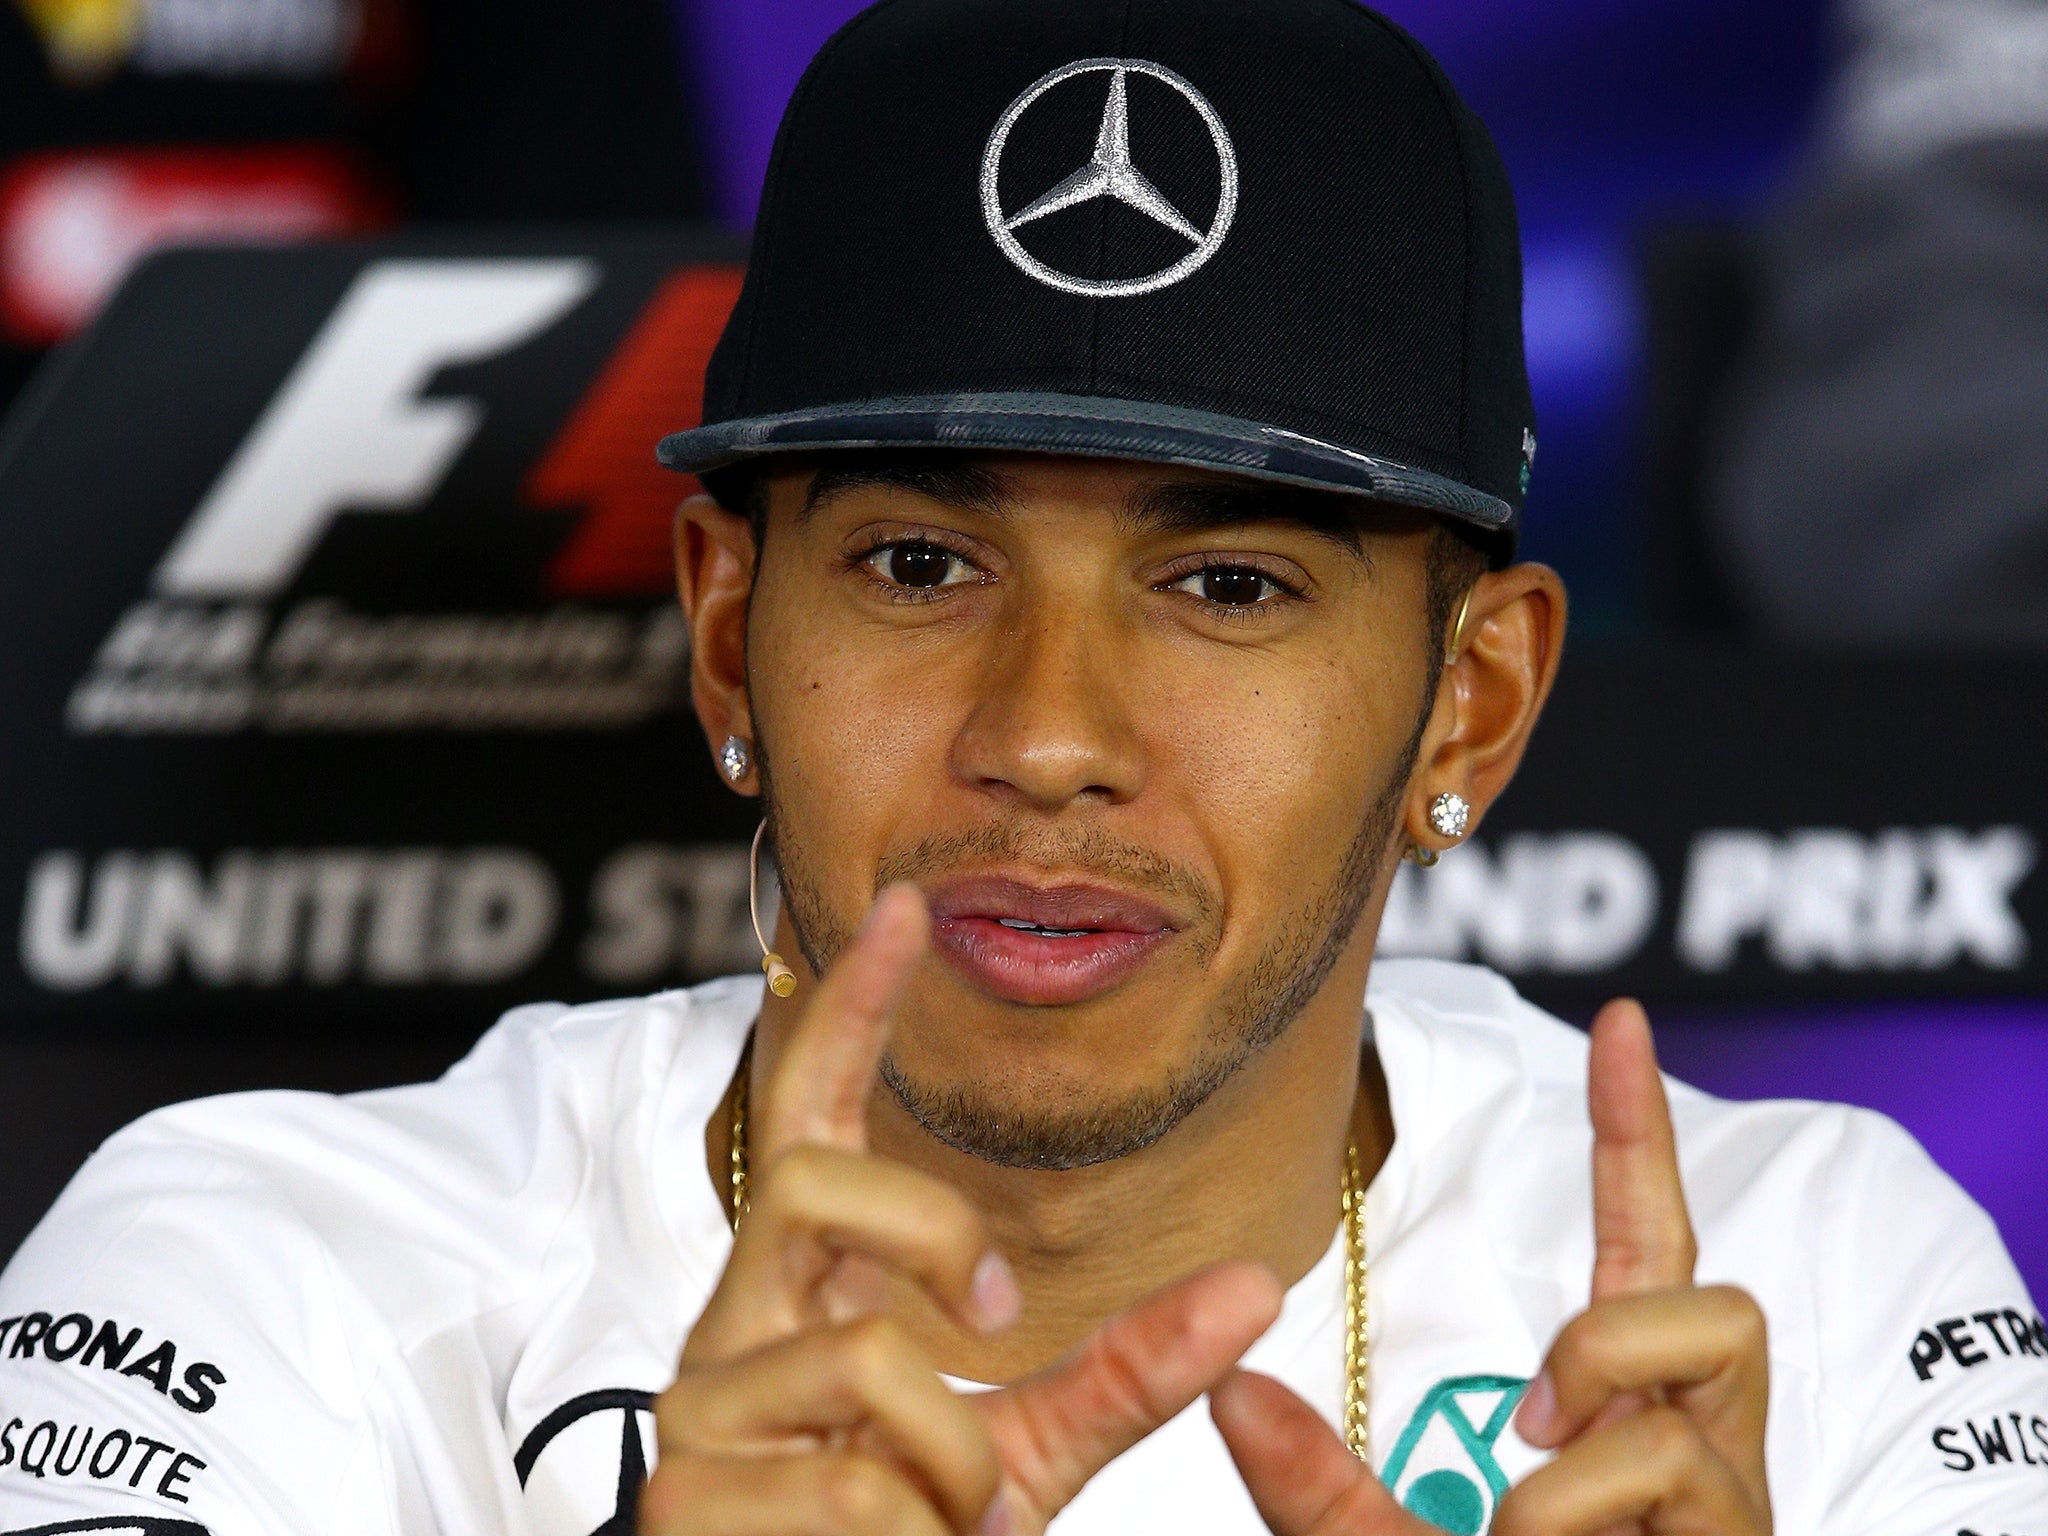 Lewis Hamilton is aiming for a 32nd career win in the US Grand Prix, which would
make him the most successful British F1 driver in history